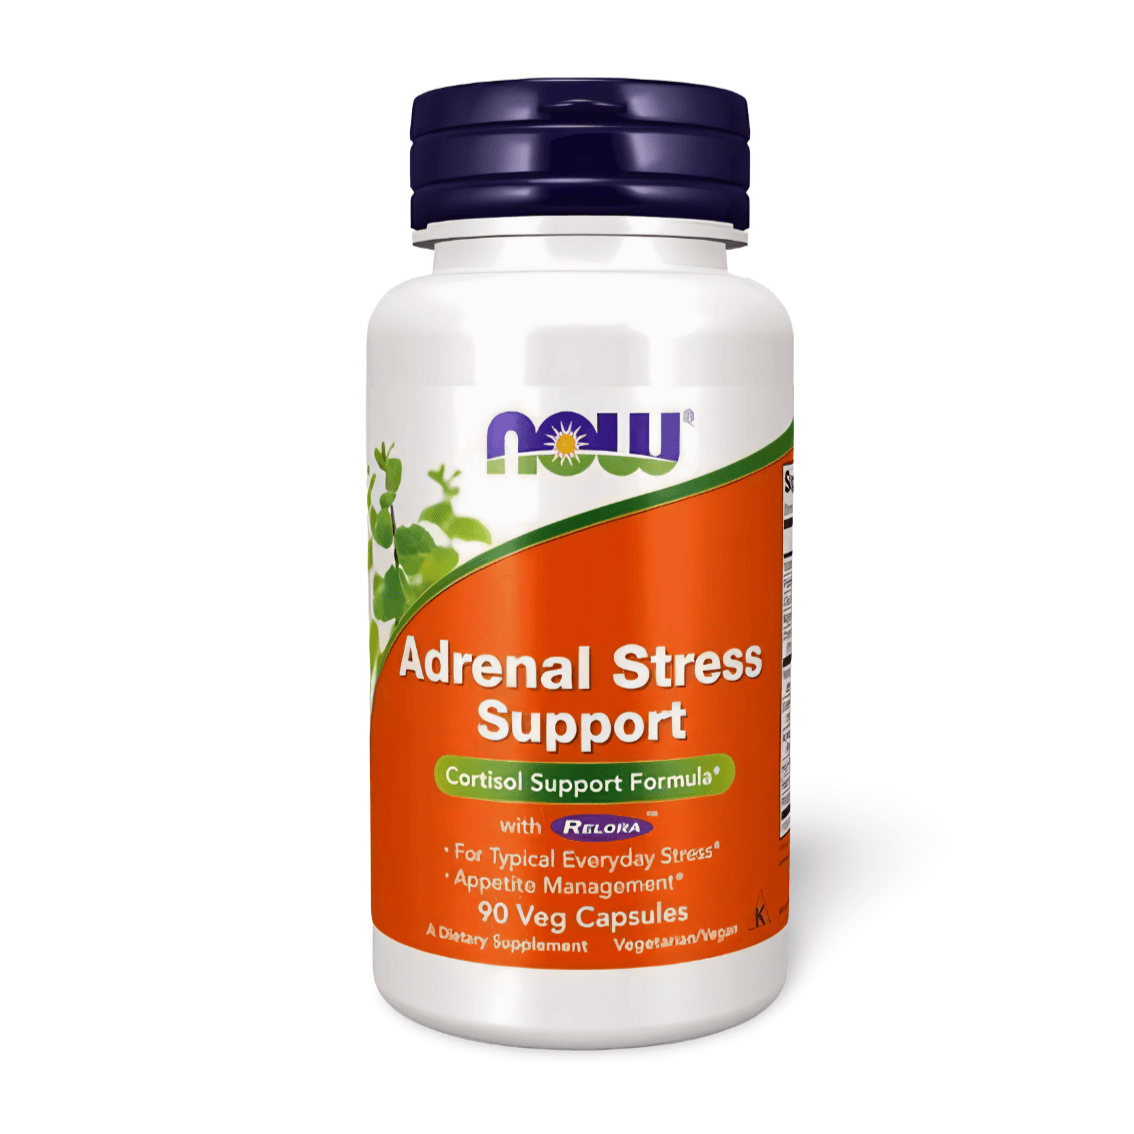 NOW Adrenal Stress Support - THE GOOD STUFF